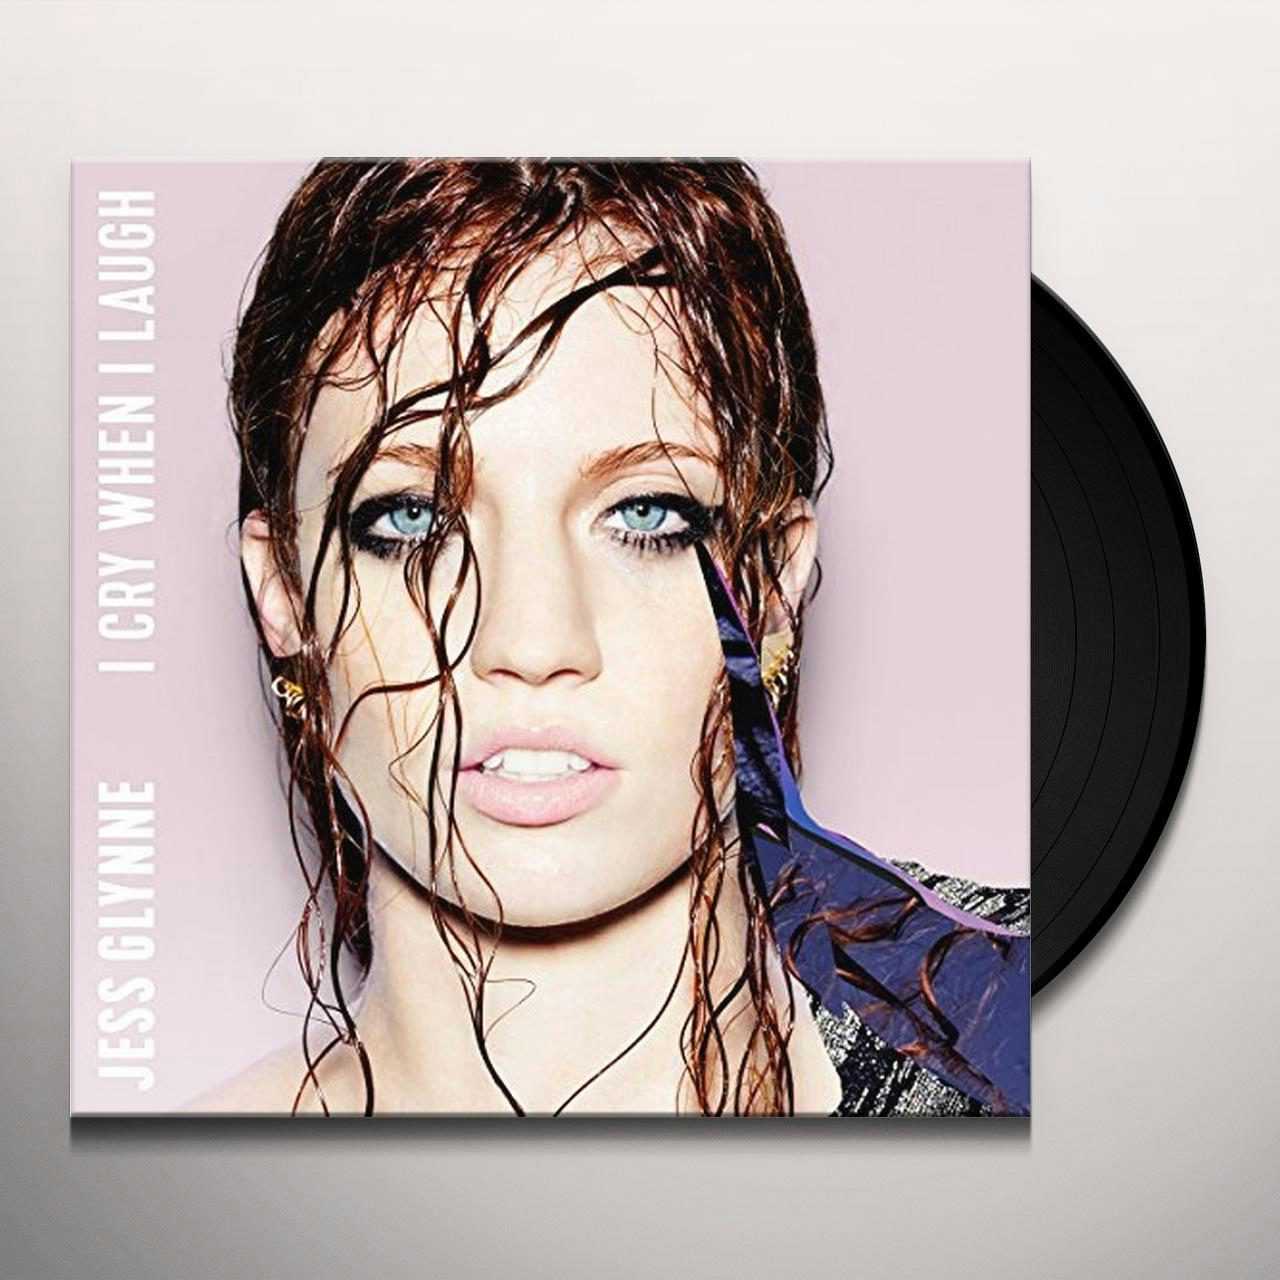 I Cry When I Laugh Vinyl Record - Jess Glynne